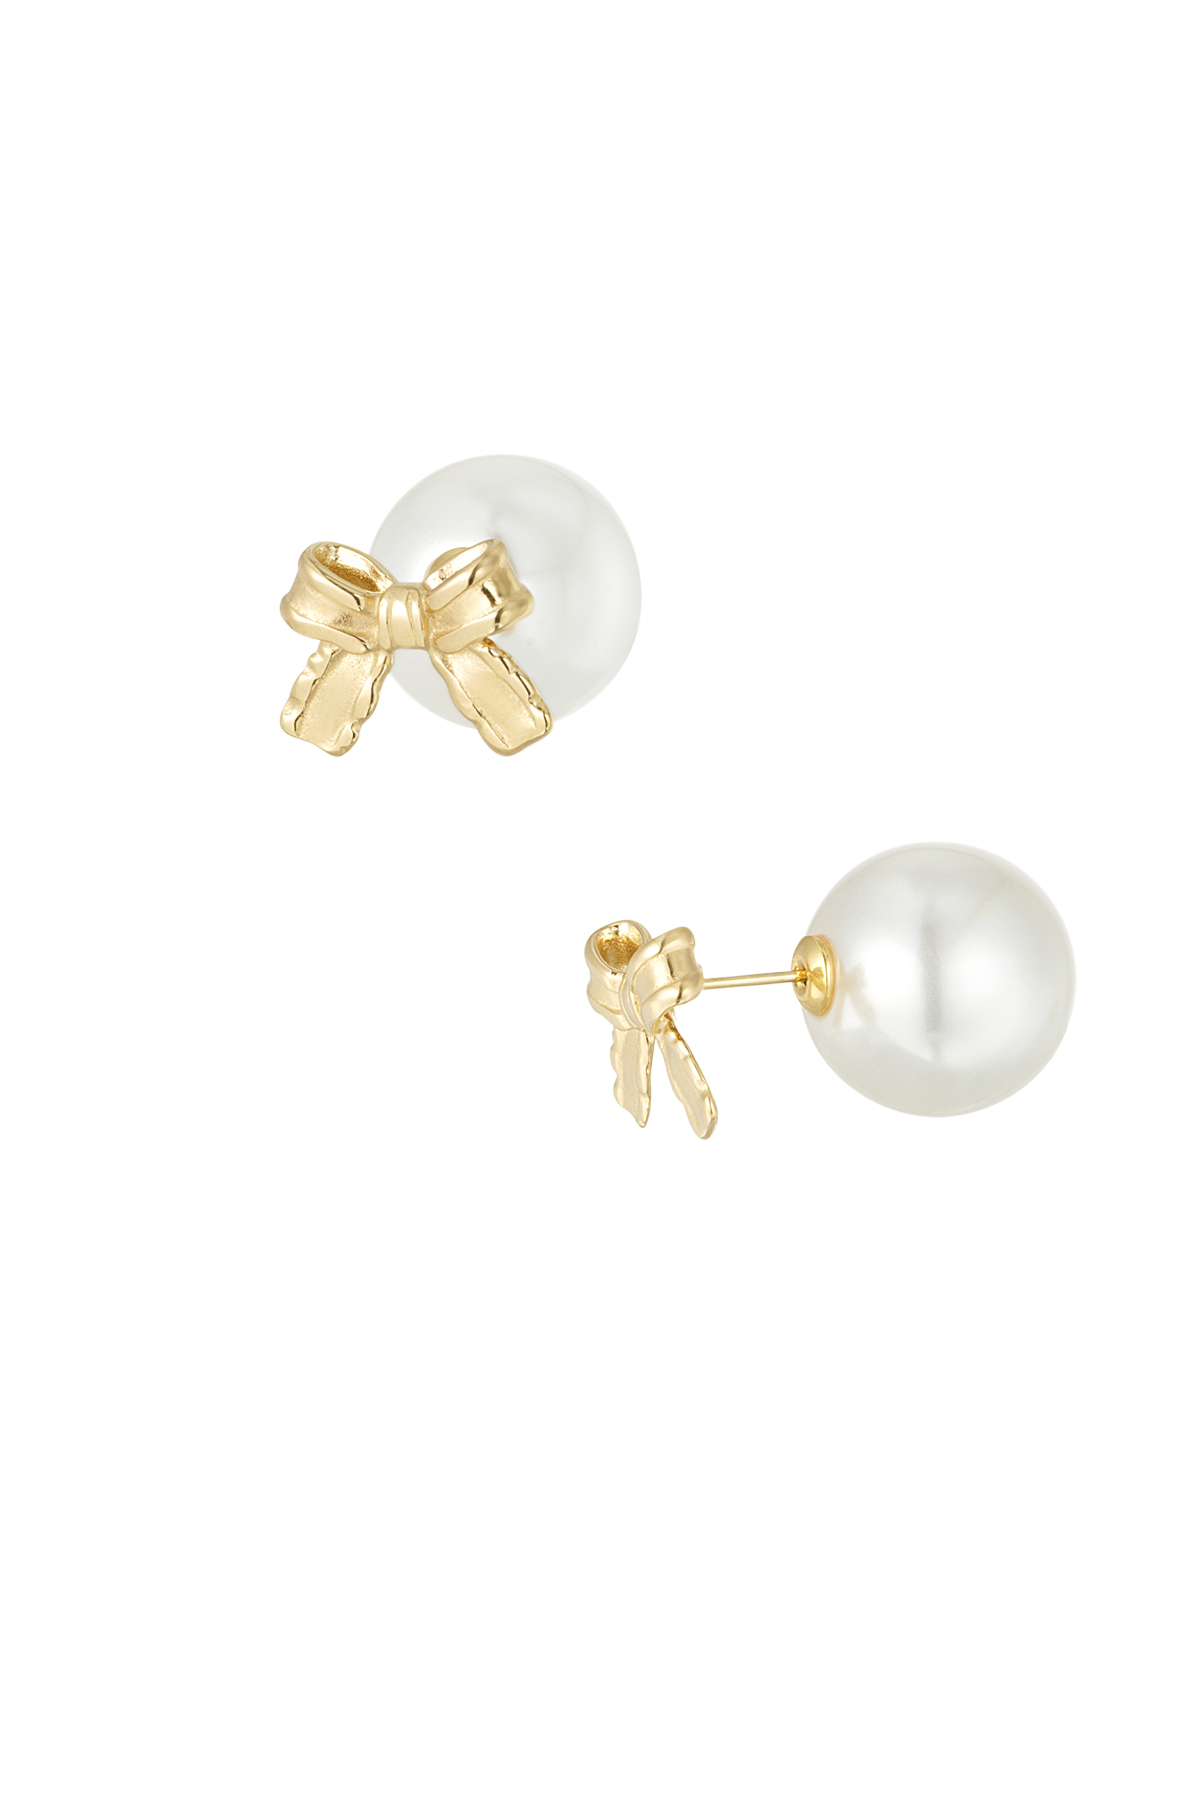 Boucles d'oreilles baby boo bow - or blanc